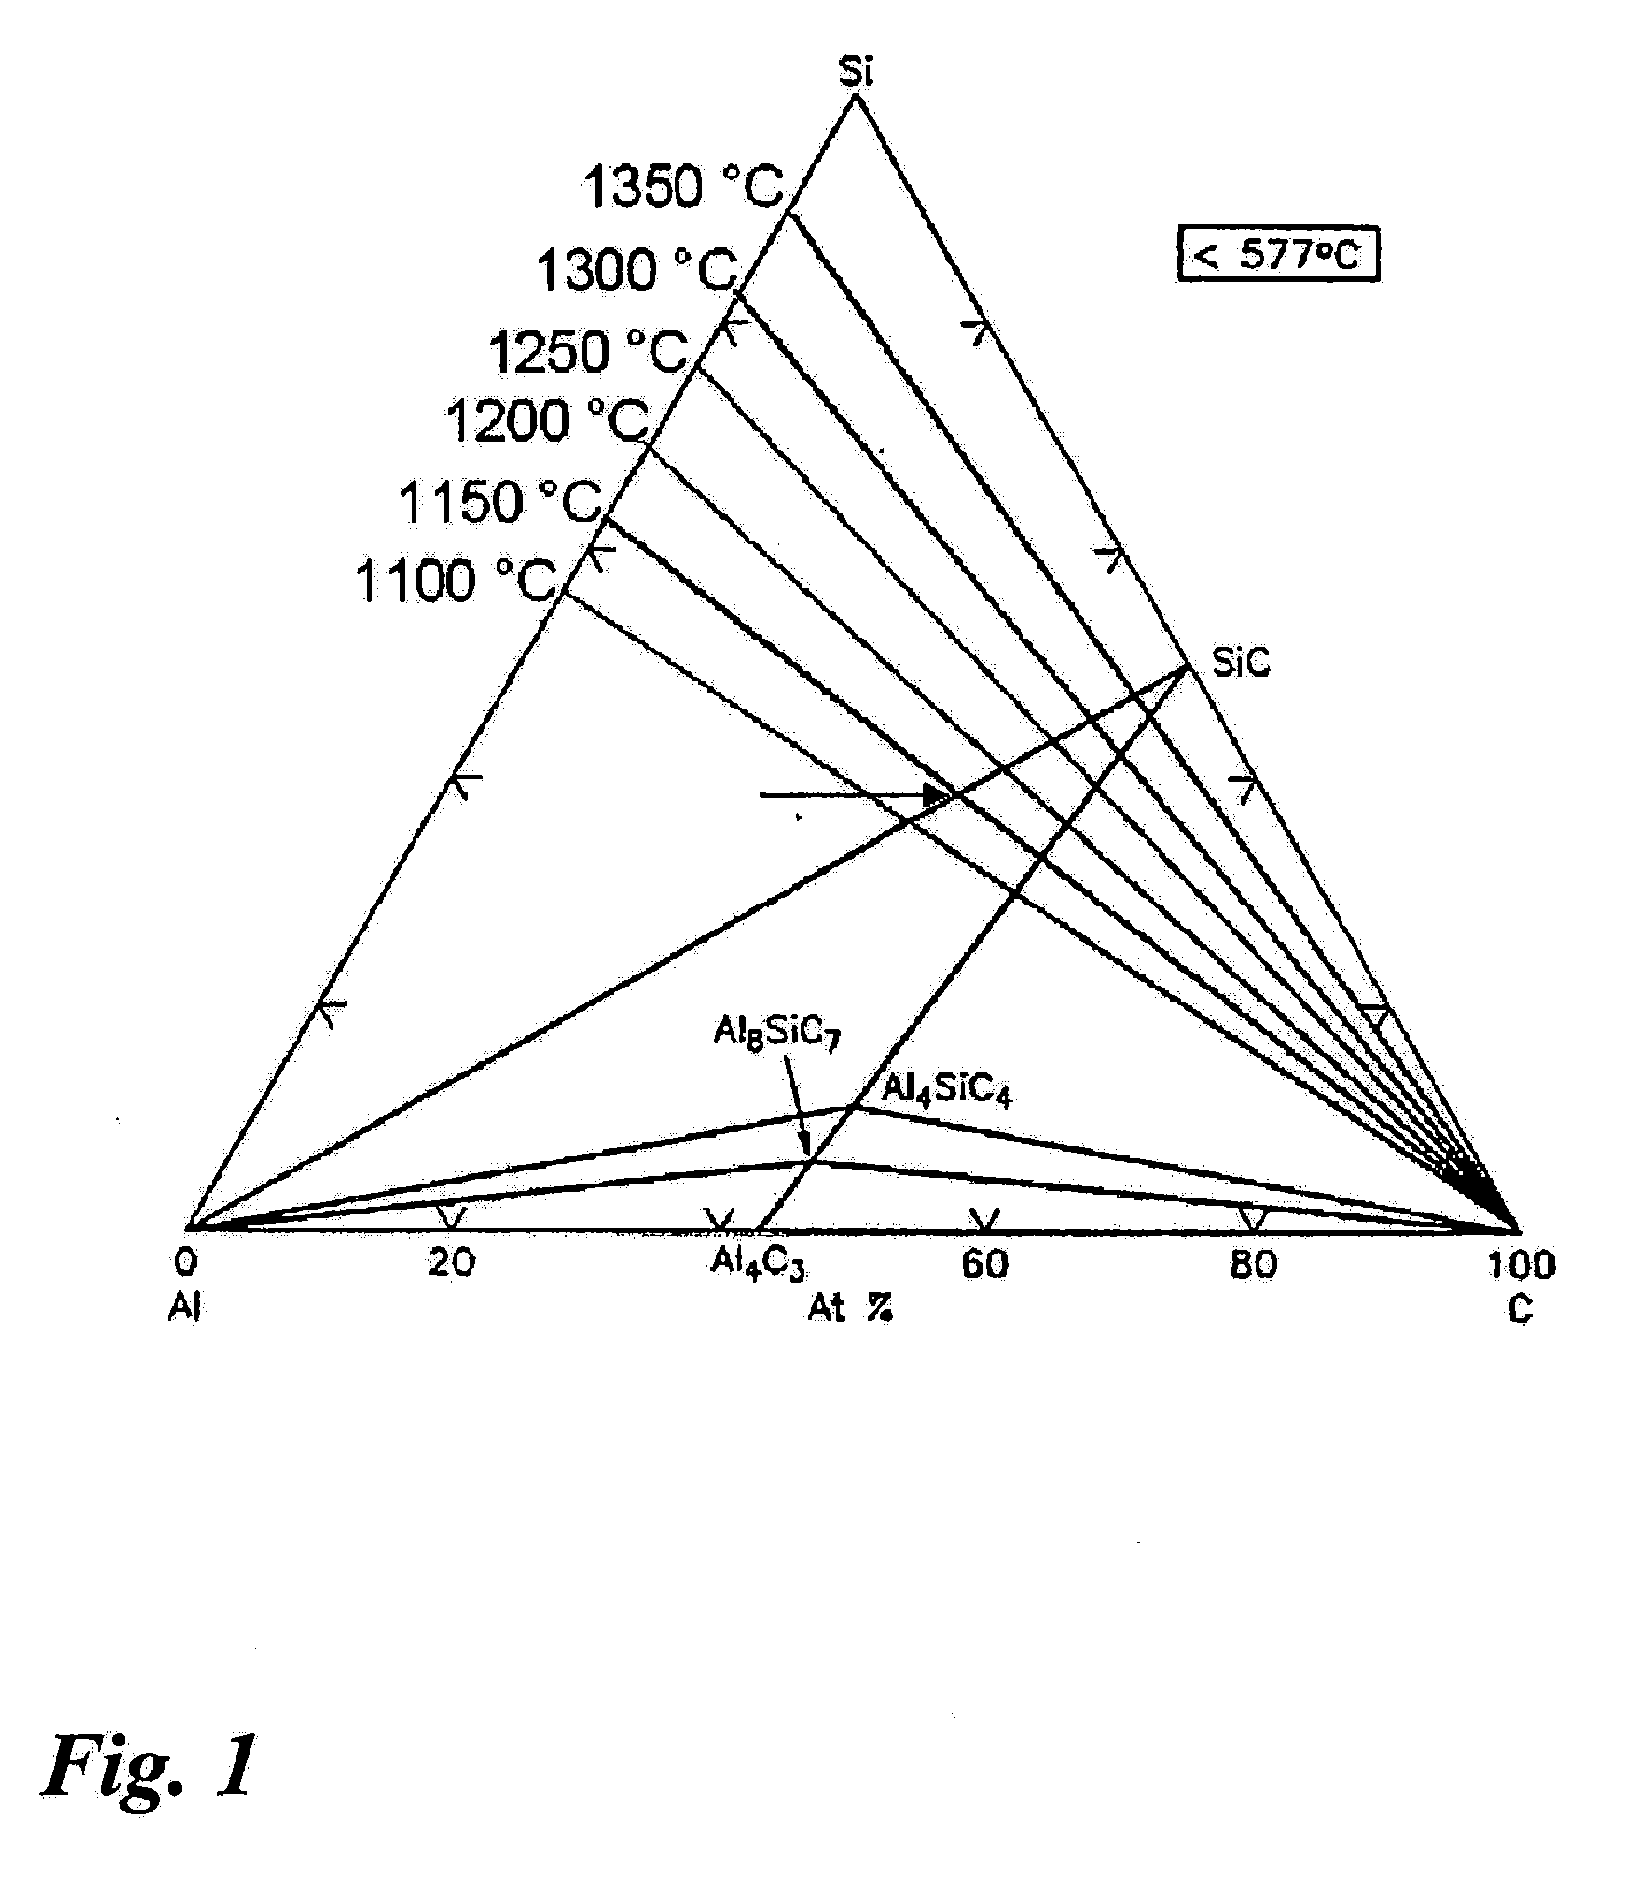 Porous beta-sic-containing ceramic molded article comprising an aluminum oxide coating, and method for the production thereof